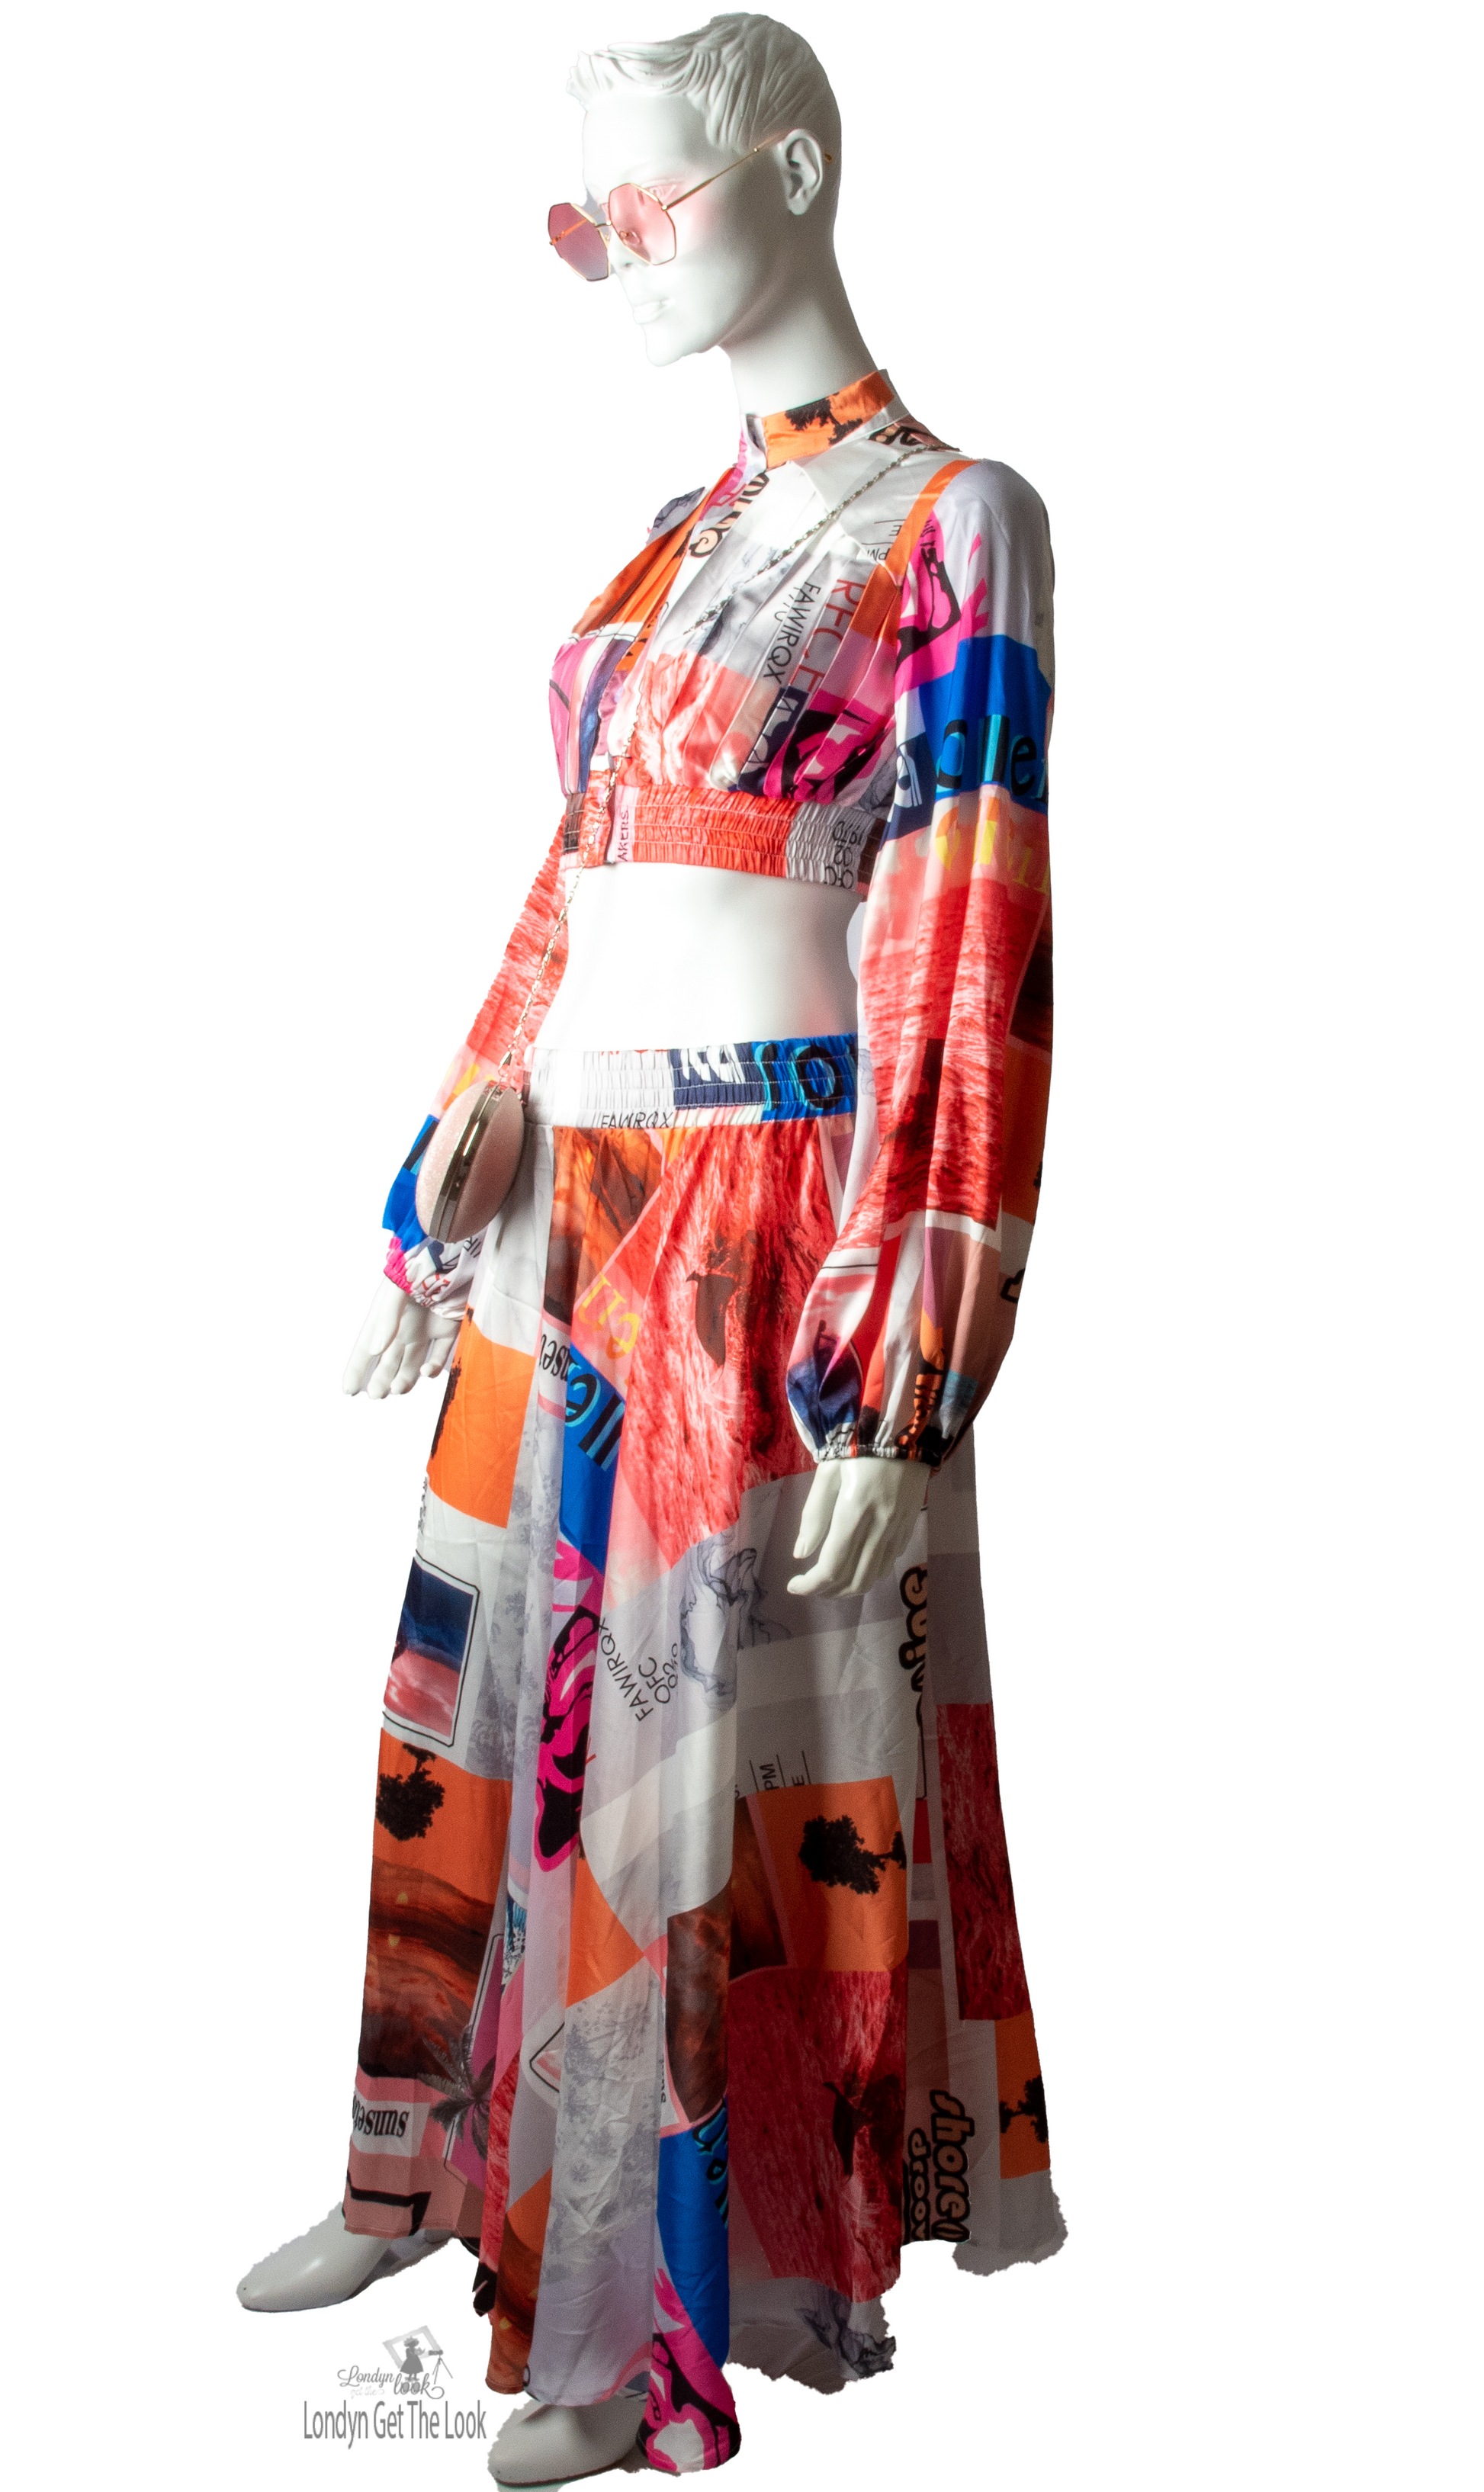 Long Sleeve Print Two Piece Set Top & Skirt featuring a button front top with pleated detail paired with matching dramatic flair maxi length skirt mock neck long puffy sleeve button-front closure with stunning shade of multi colors